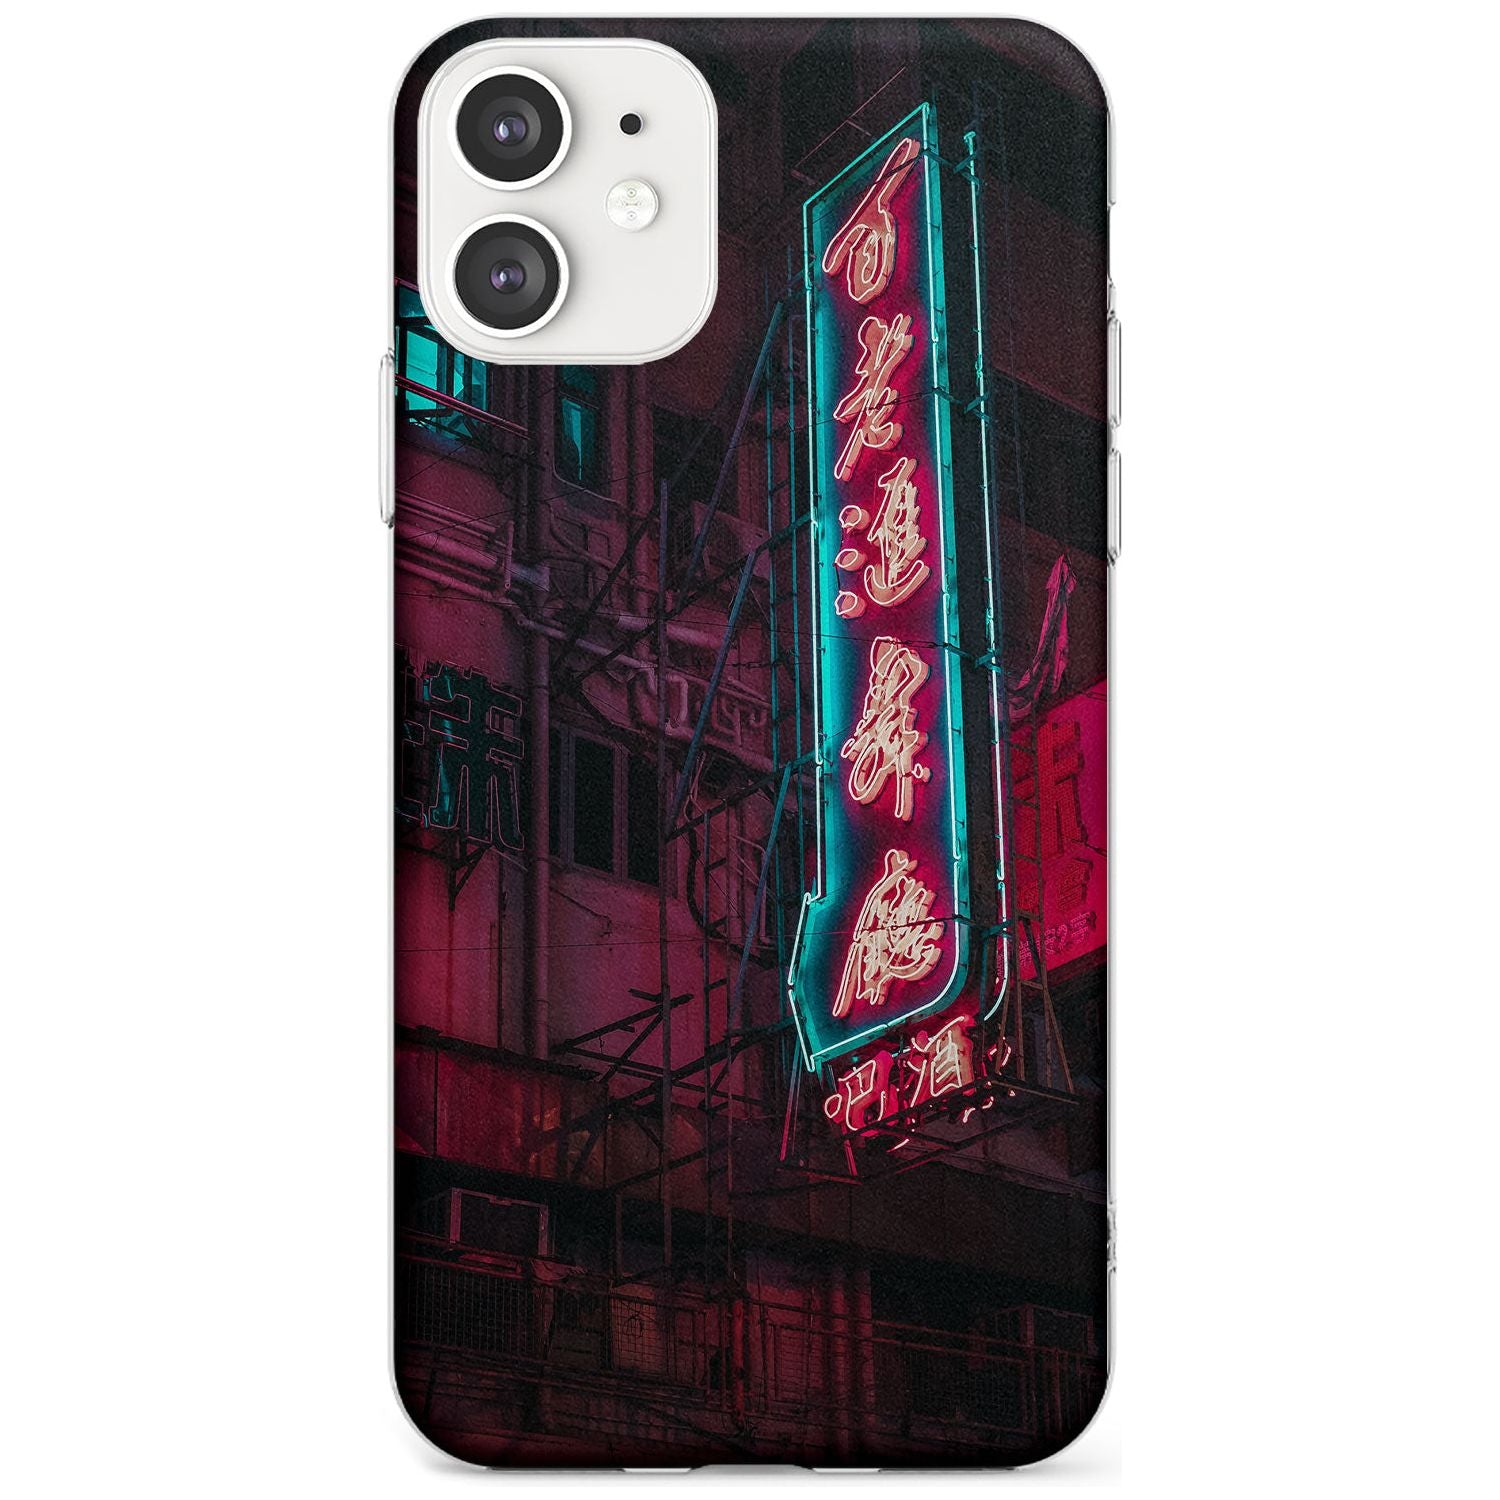 Large Kanji Sign - Neon Cities Photographs Slim TPU Phone Case for iPhone 11